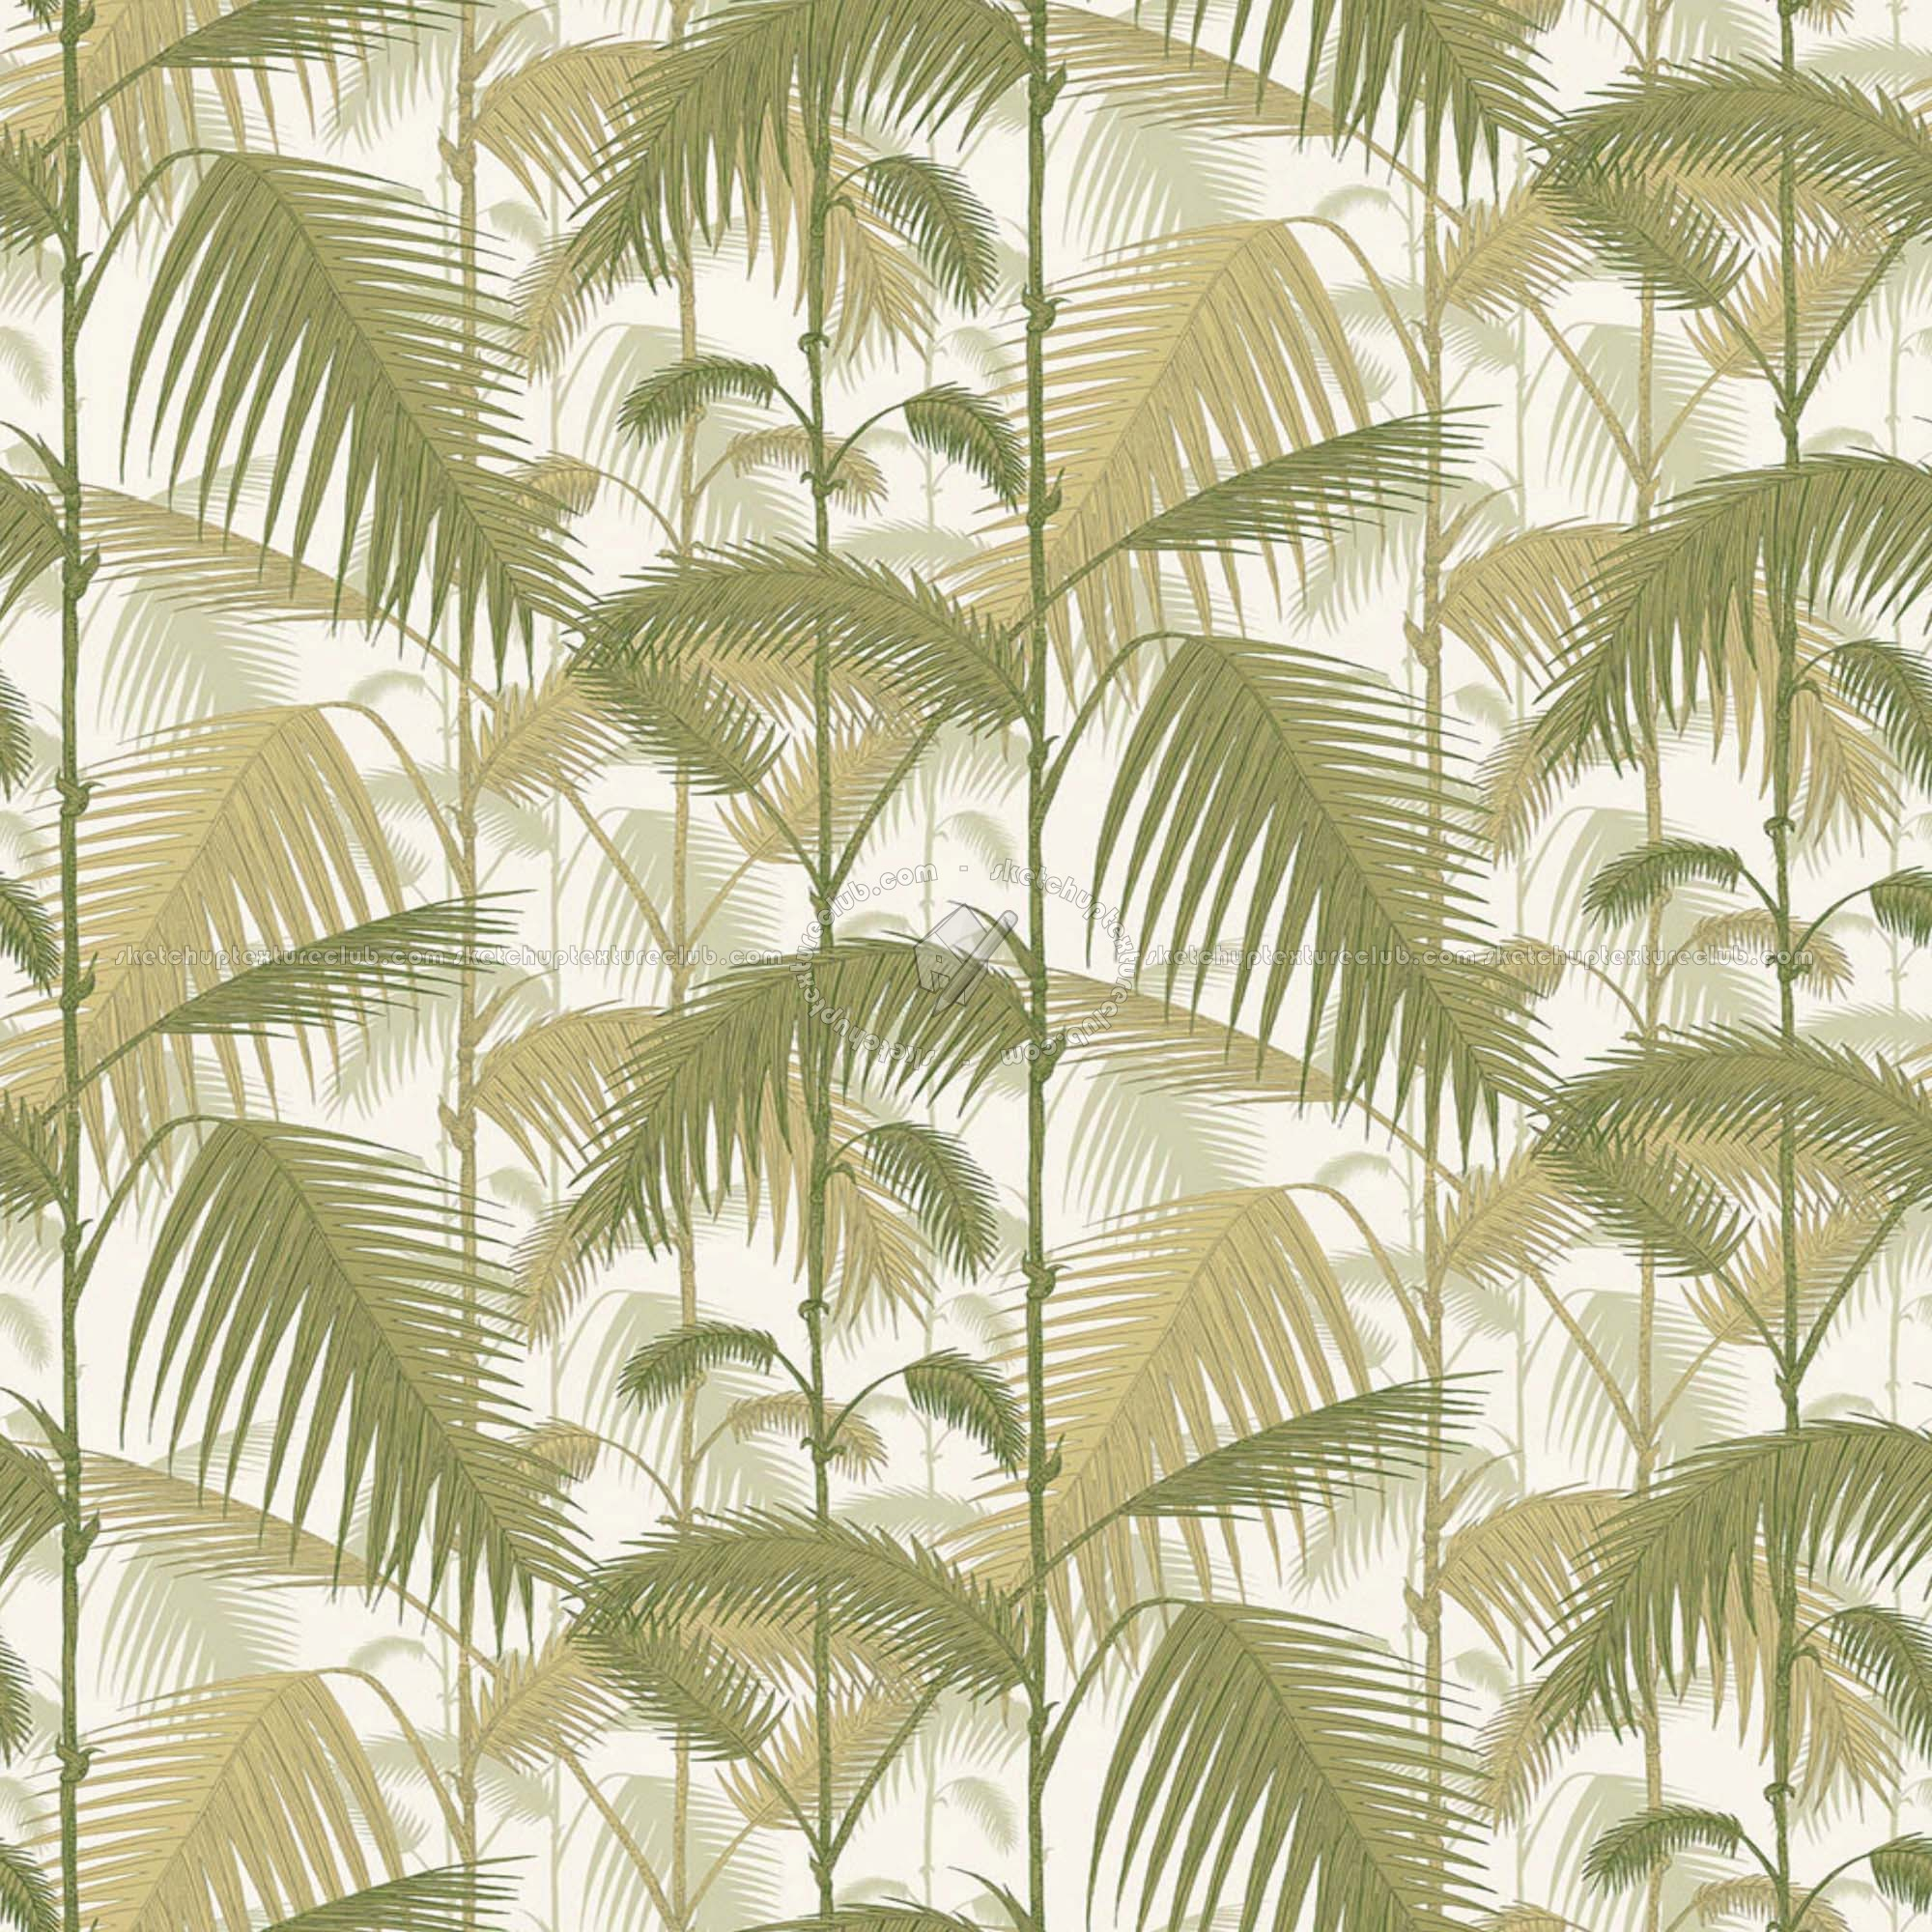 2000x2000 Vinyl wallpaper with palm leaves PBR texture seamless 21566